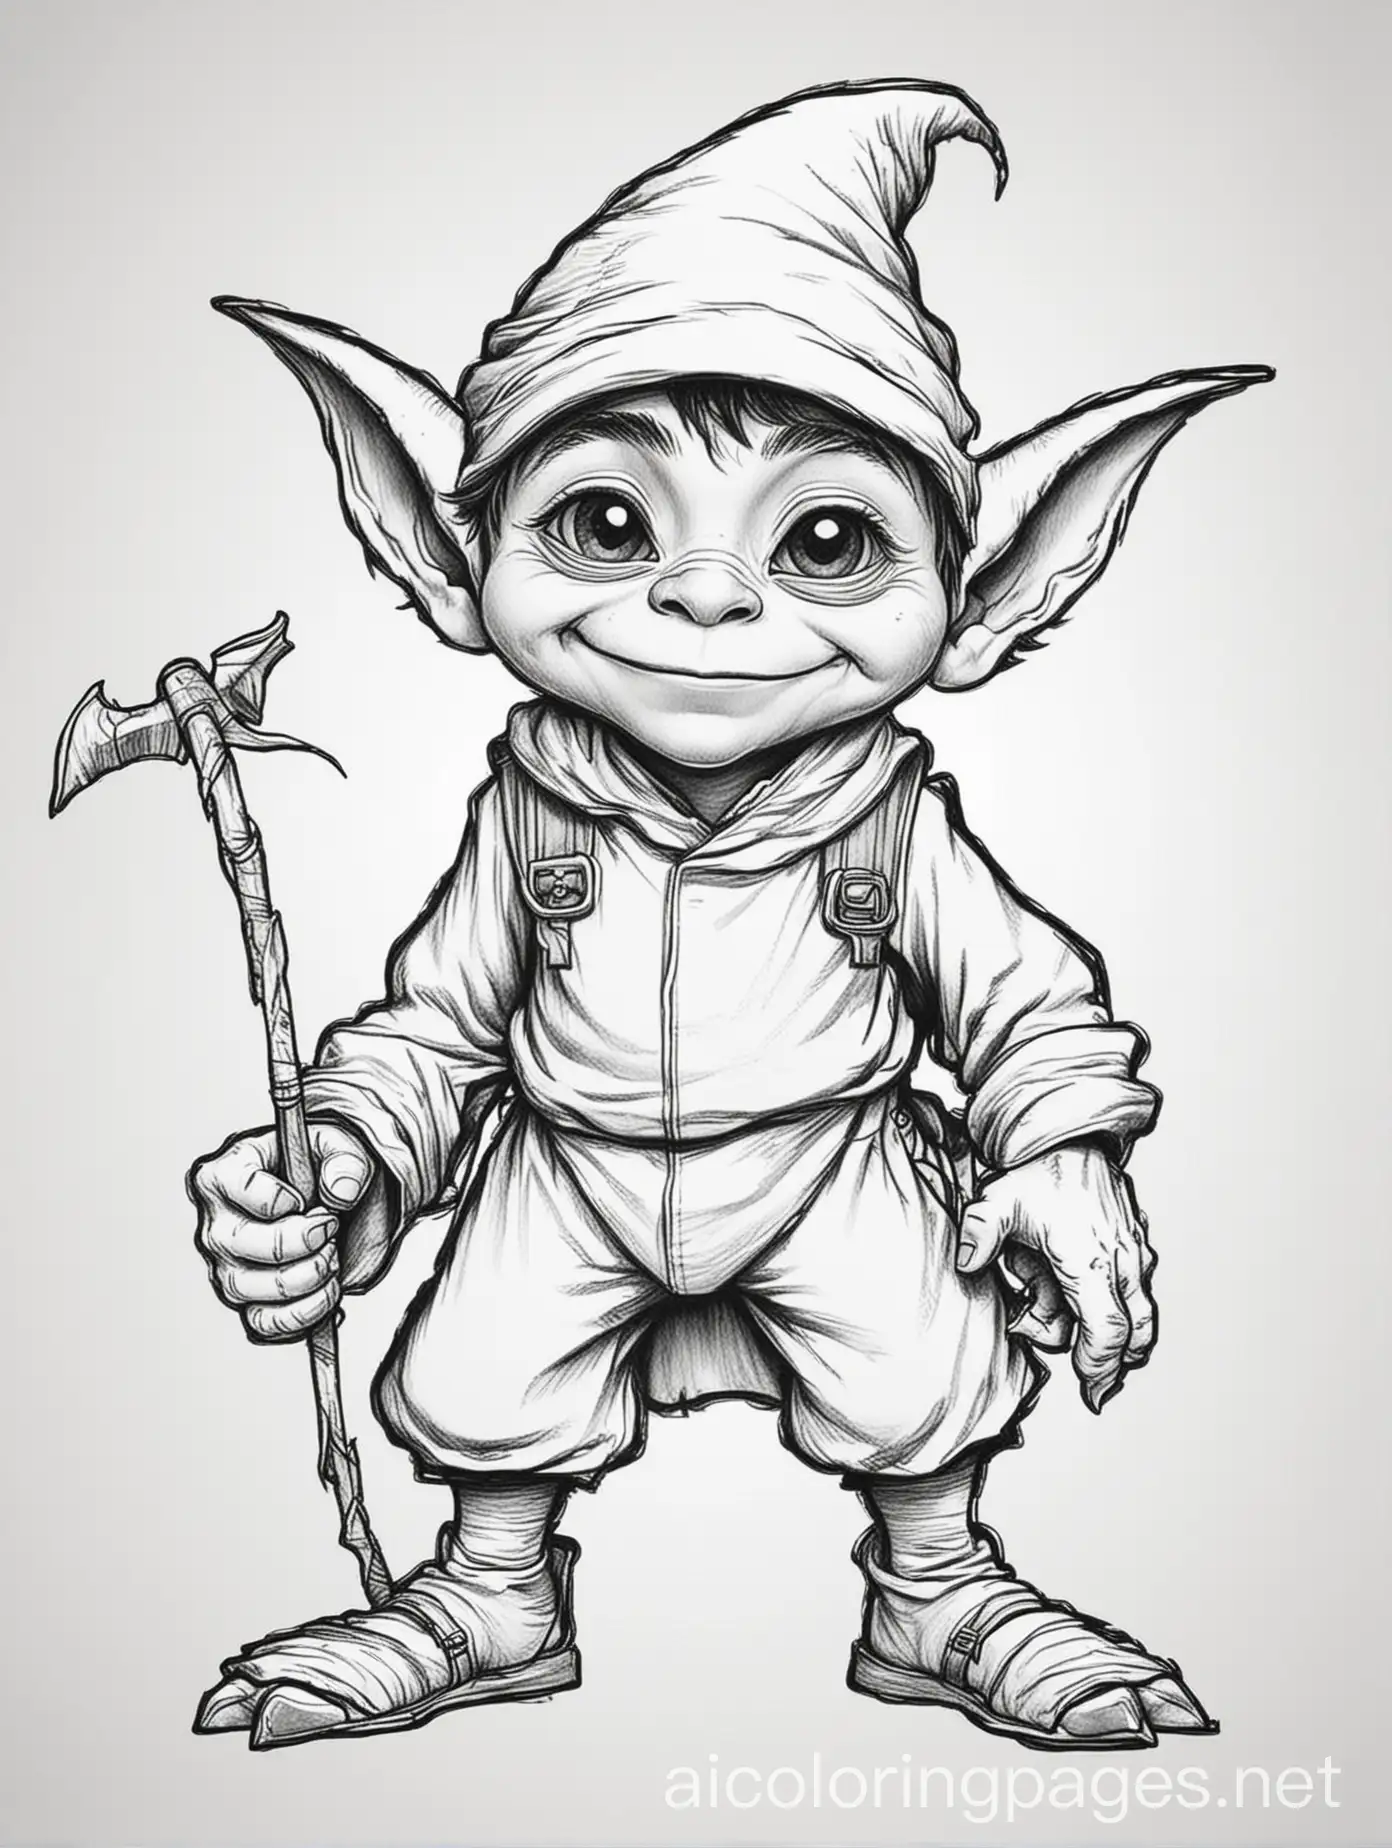 Goblin-Coloring-Page-in-Black-and-White-with-Simple-Design